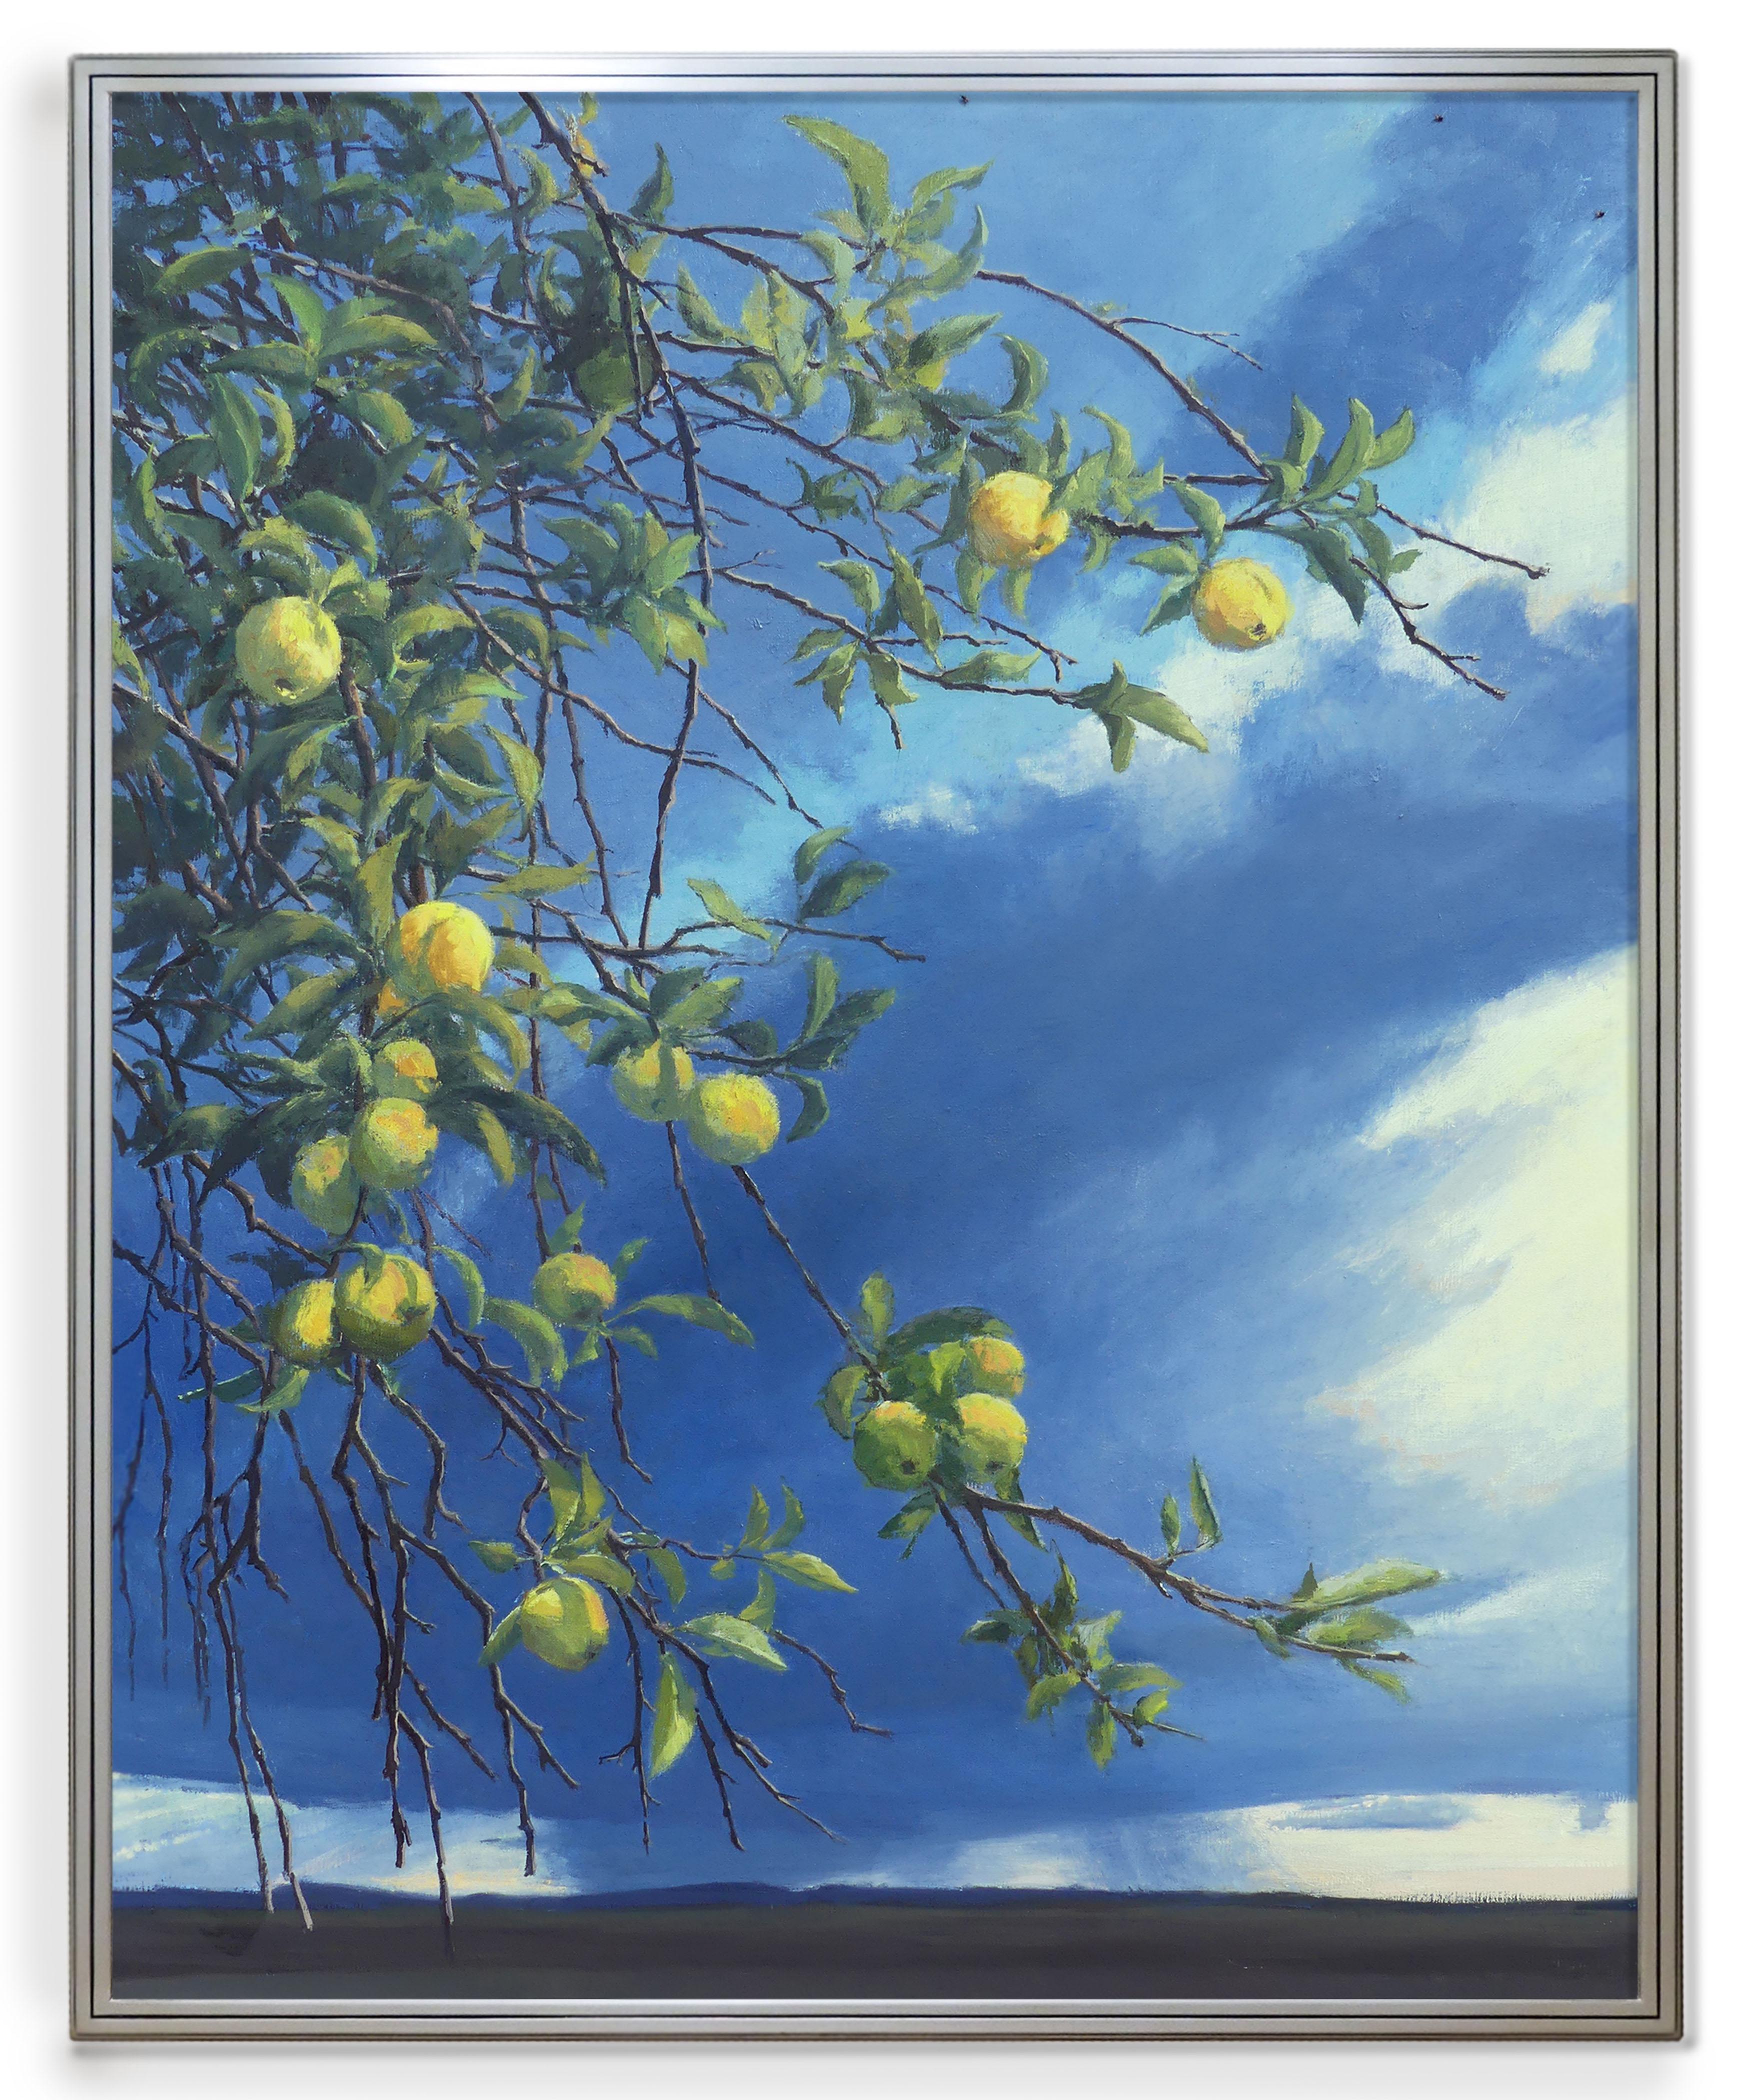 Kate Starling Landscape Painting - Green Apples (Luminous contemporary western landscape of moody skies & apples)